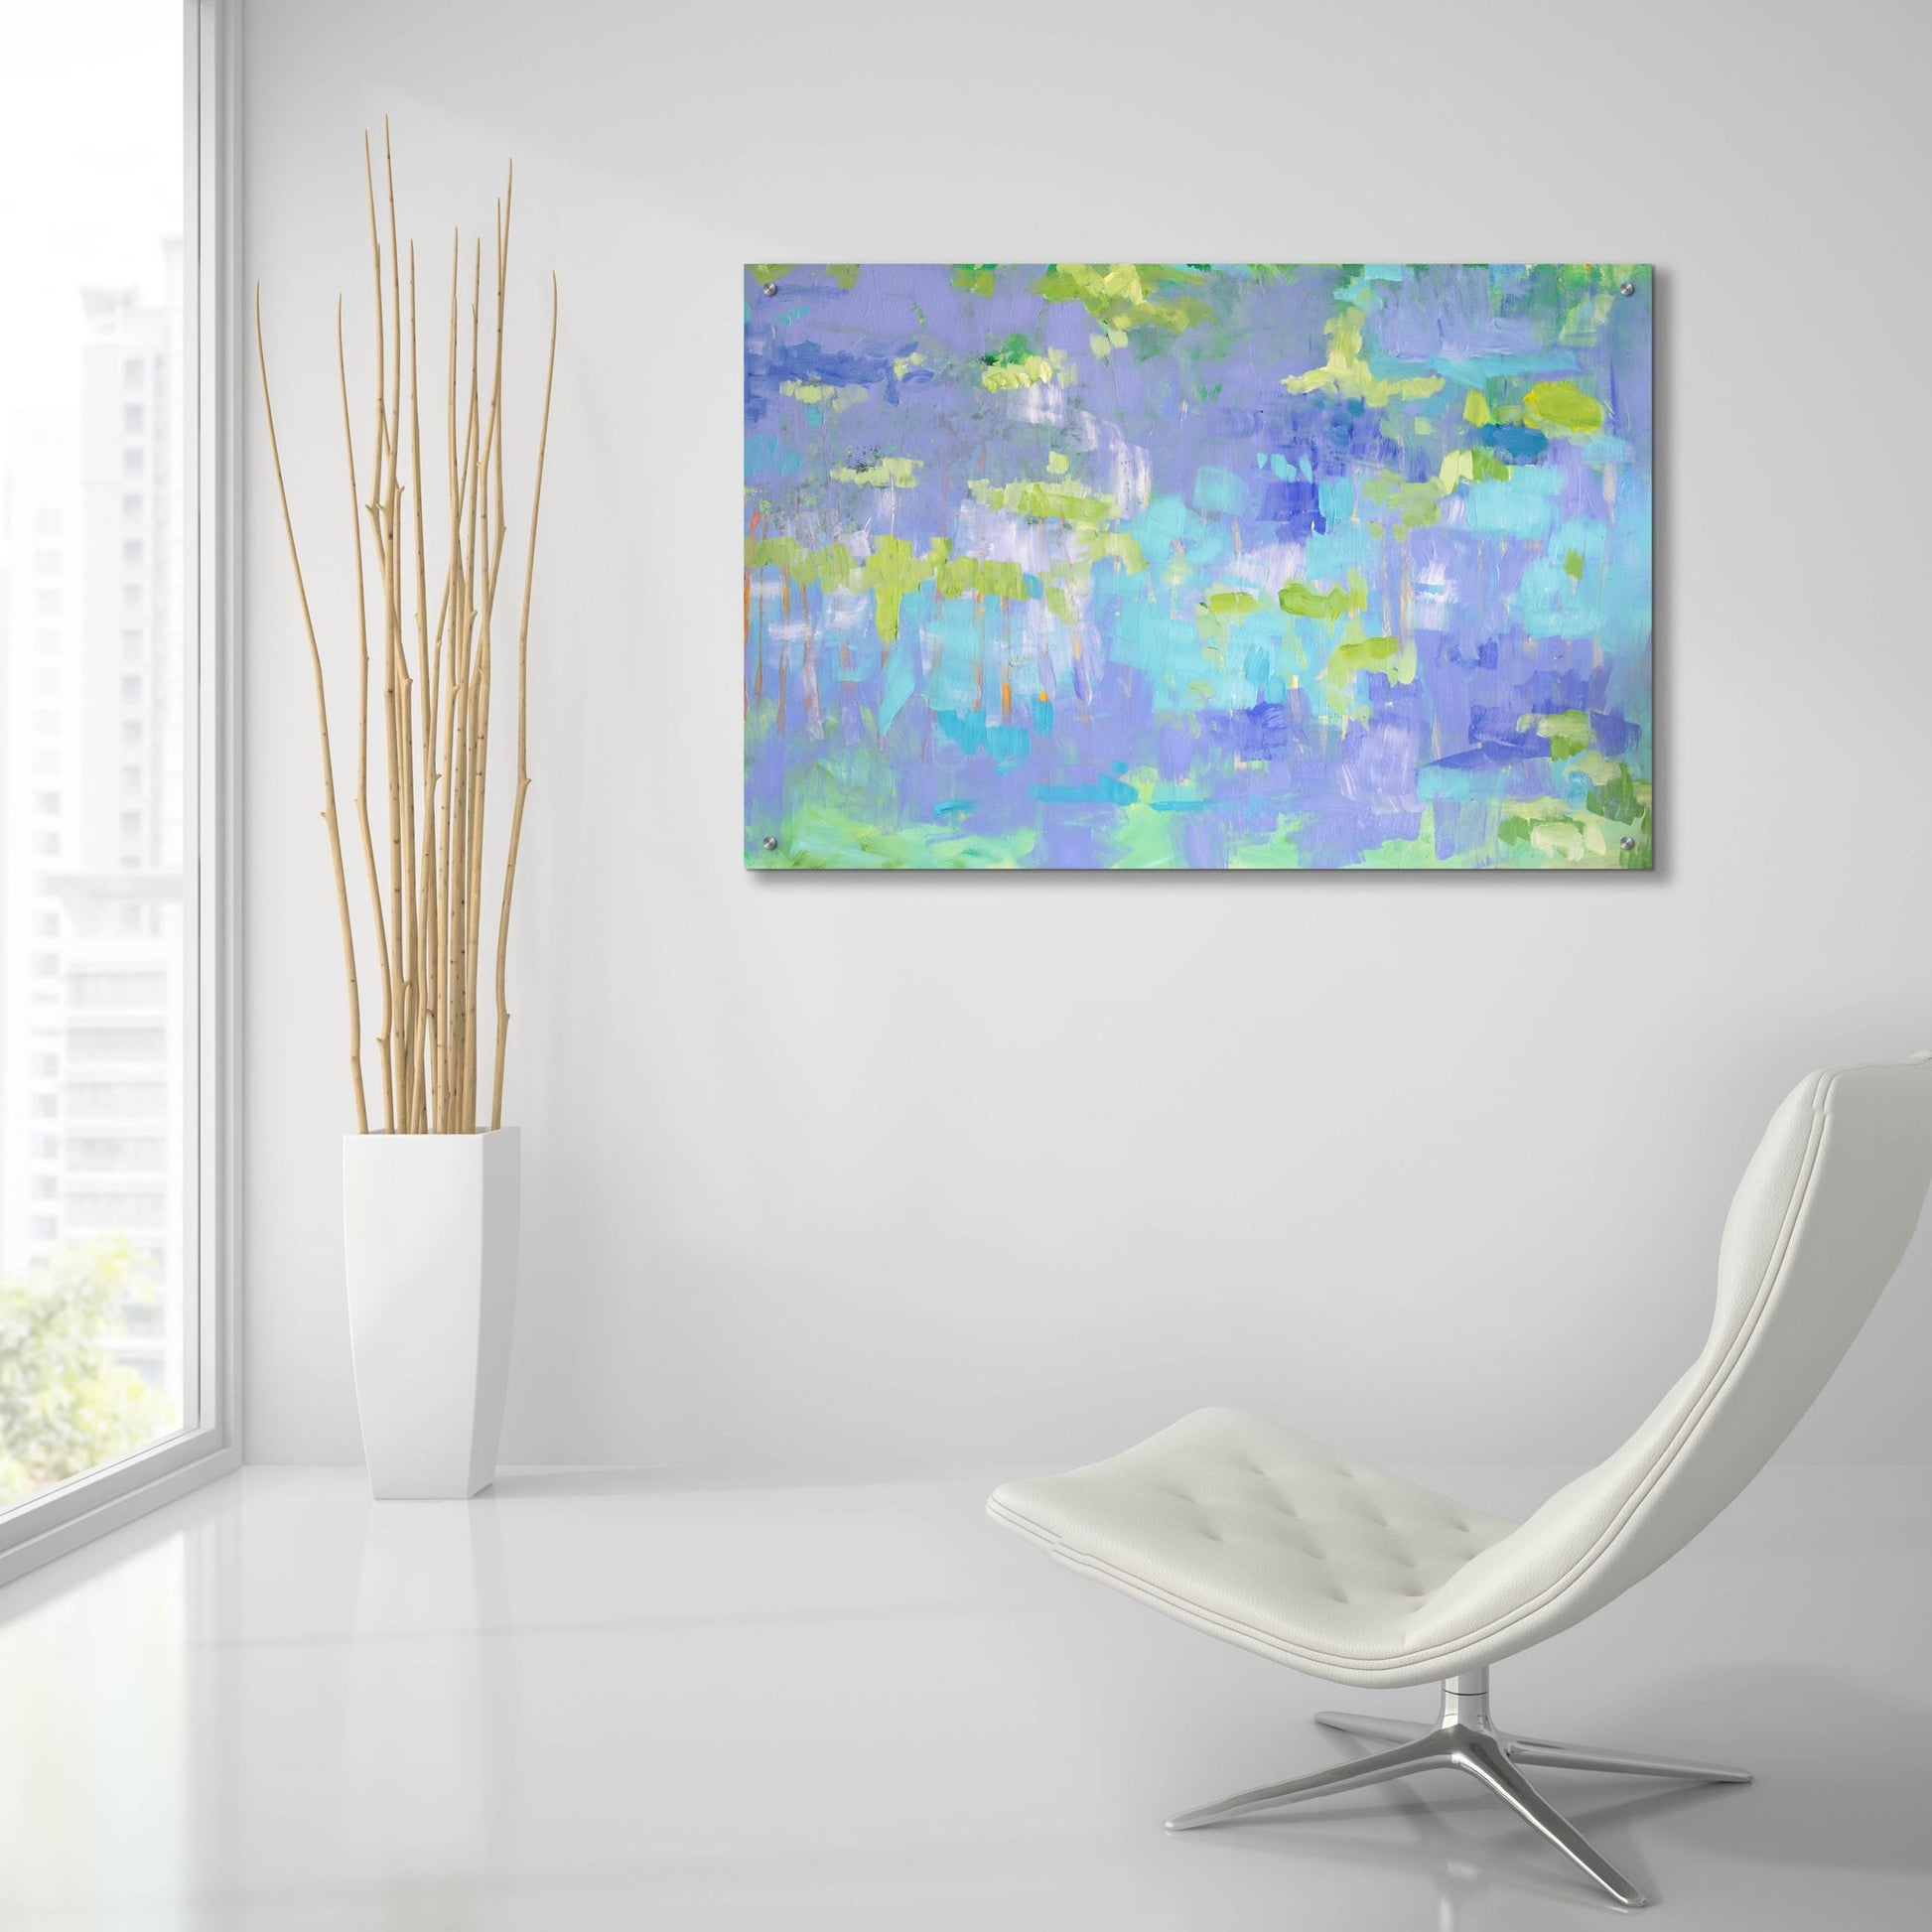 Epic Art 'Promises In Every Star' by Cassandra Gillens, Acrylic Glass Wall Art,36x24